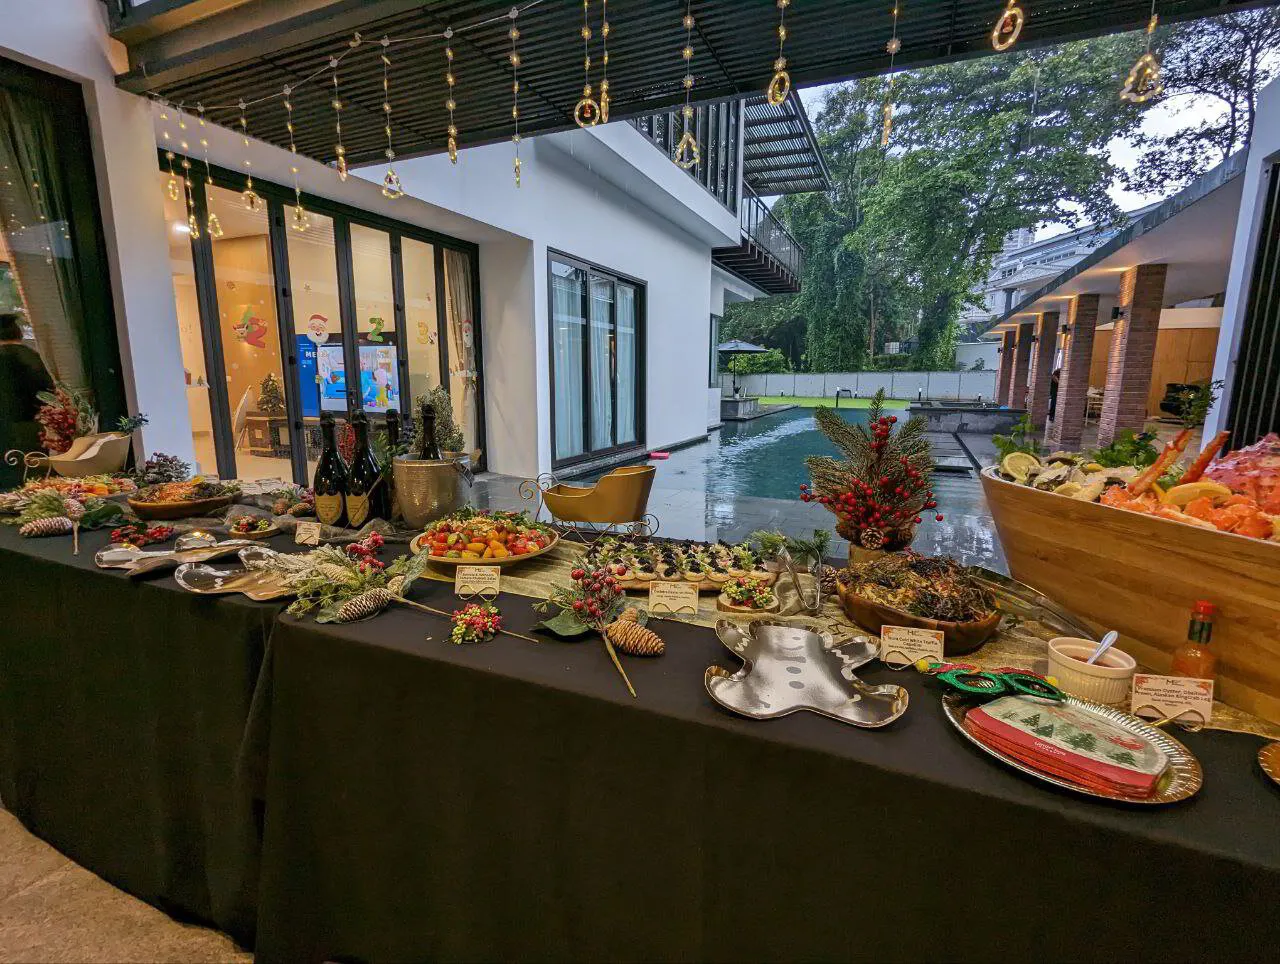 Grand BBQ Feast for 65 - A Gourmet BBQ Experience